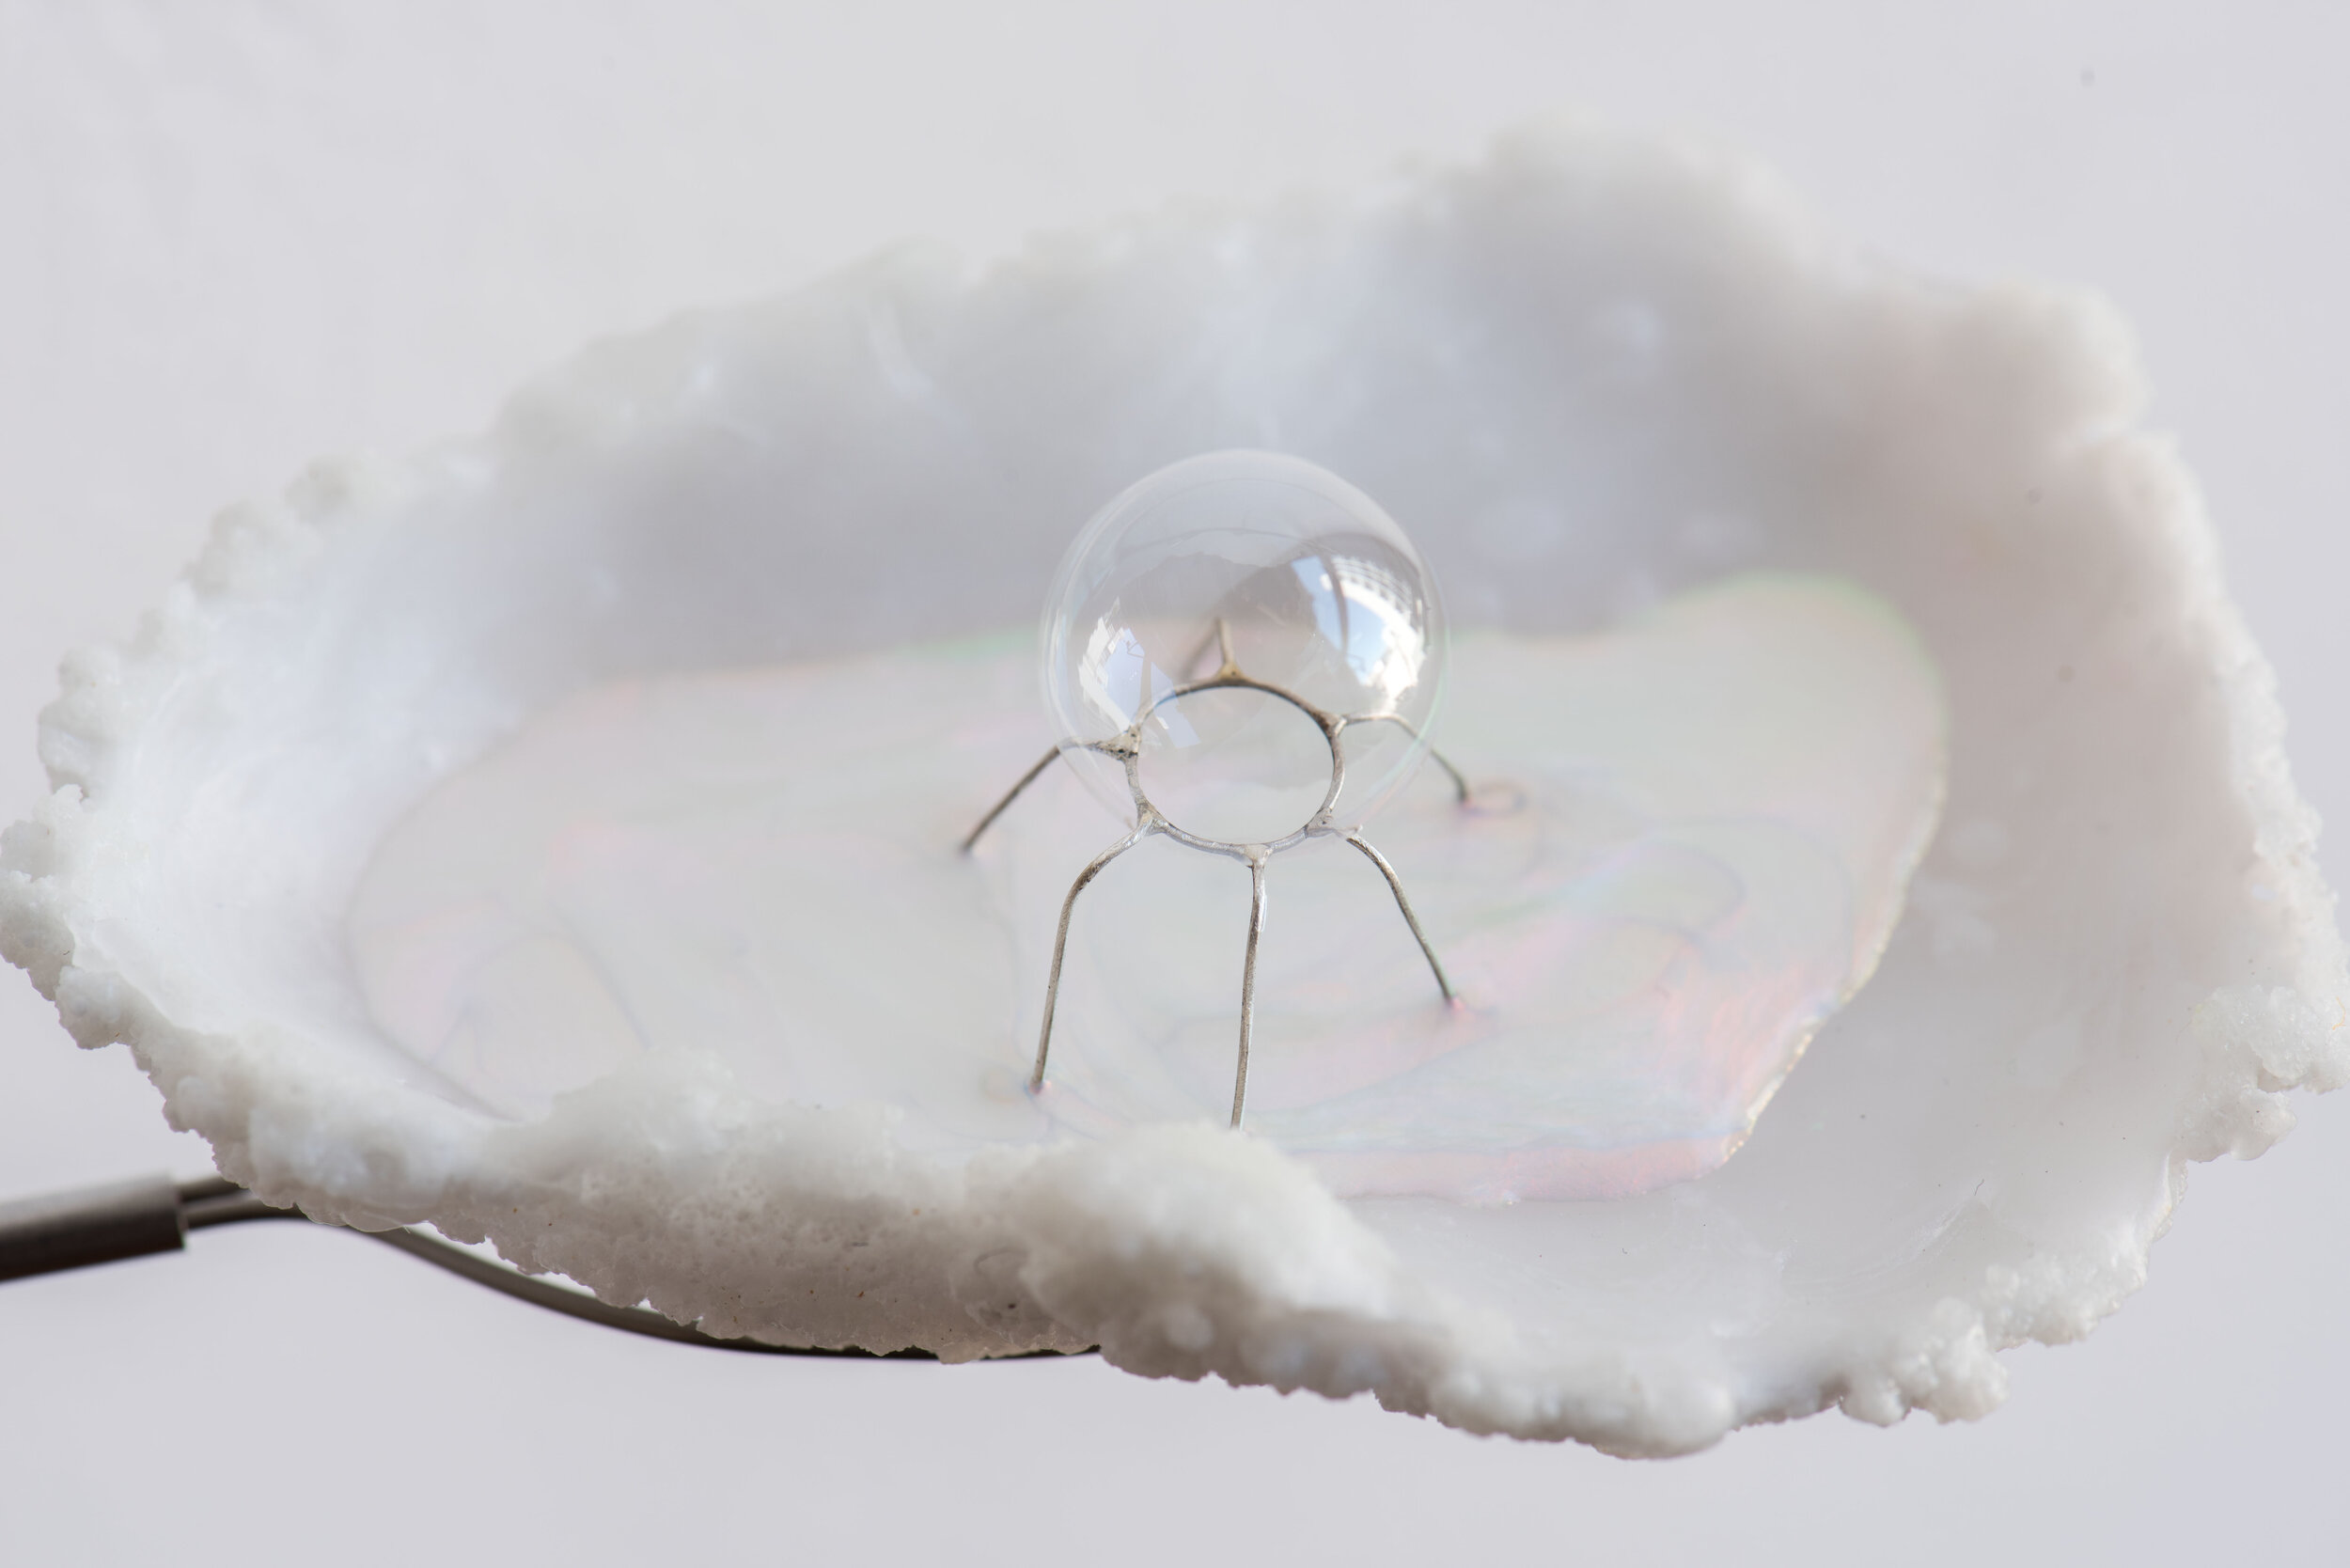   Ripple In , crystal grown from calcium acetate, paraffin wax, liquid crystal, sterling silver, plastic, 2019. 